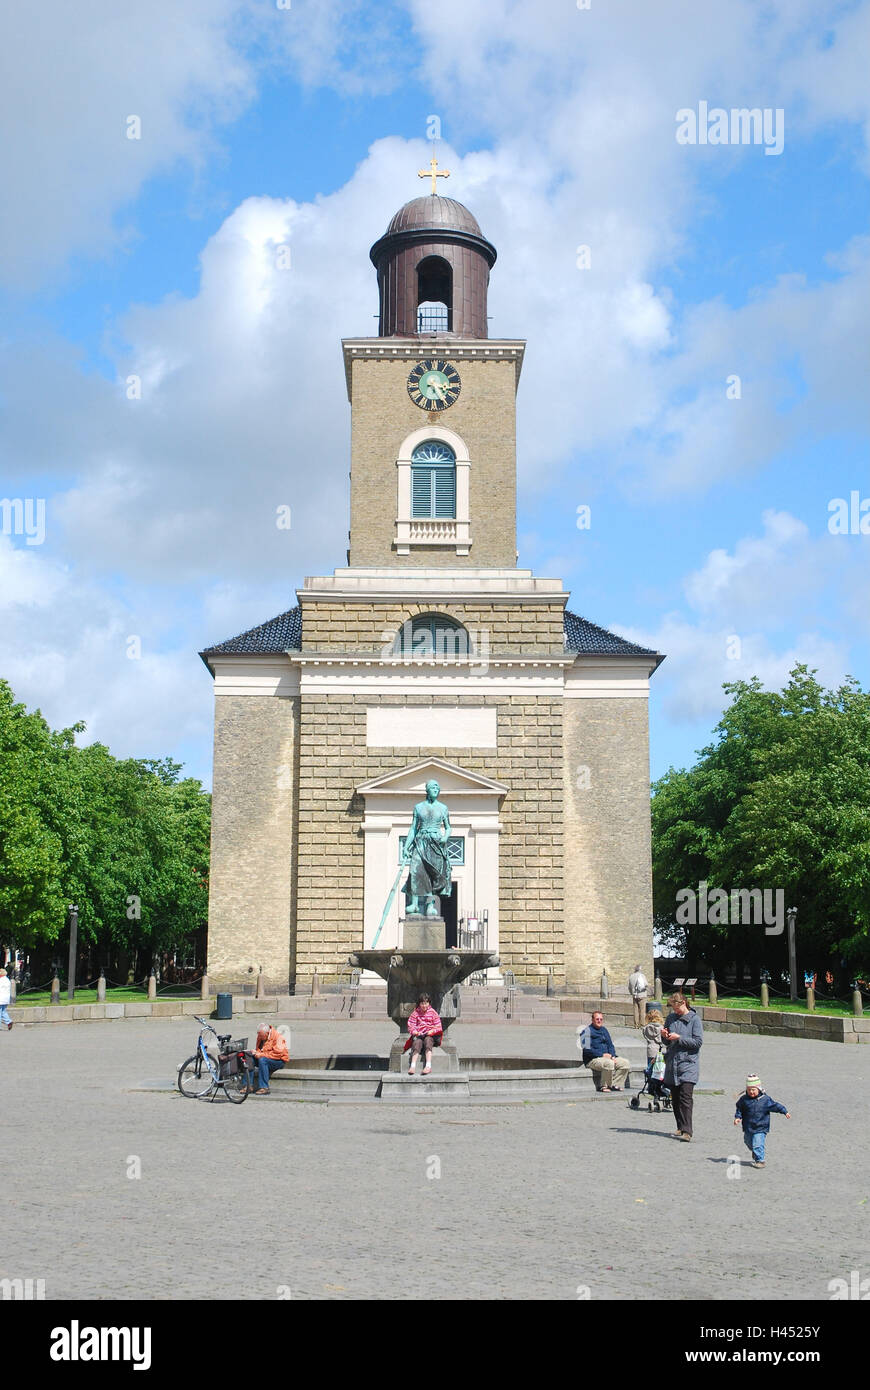 Germany, Schleswig - Holstein, north frieze country, Husum, marketplace, church, Stock Photo